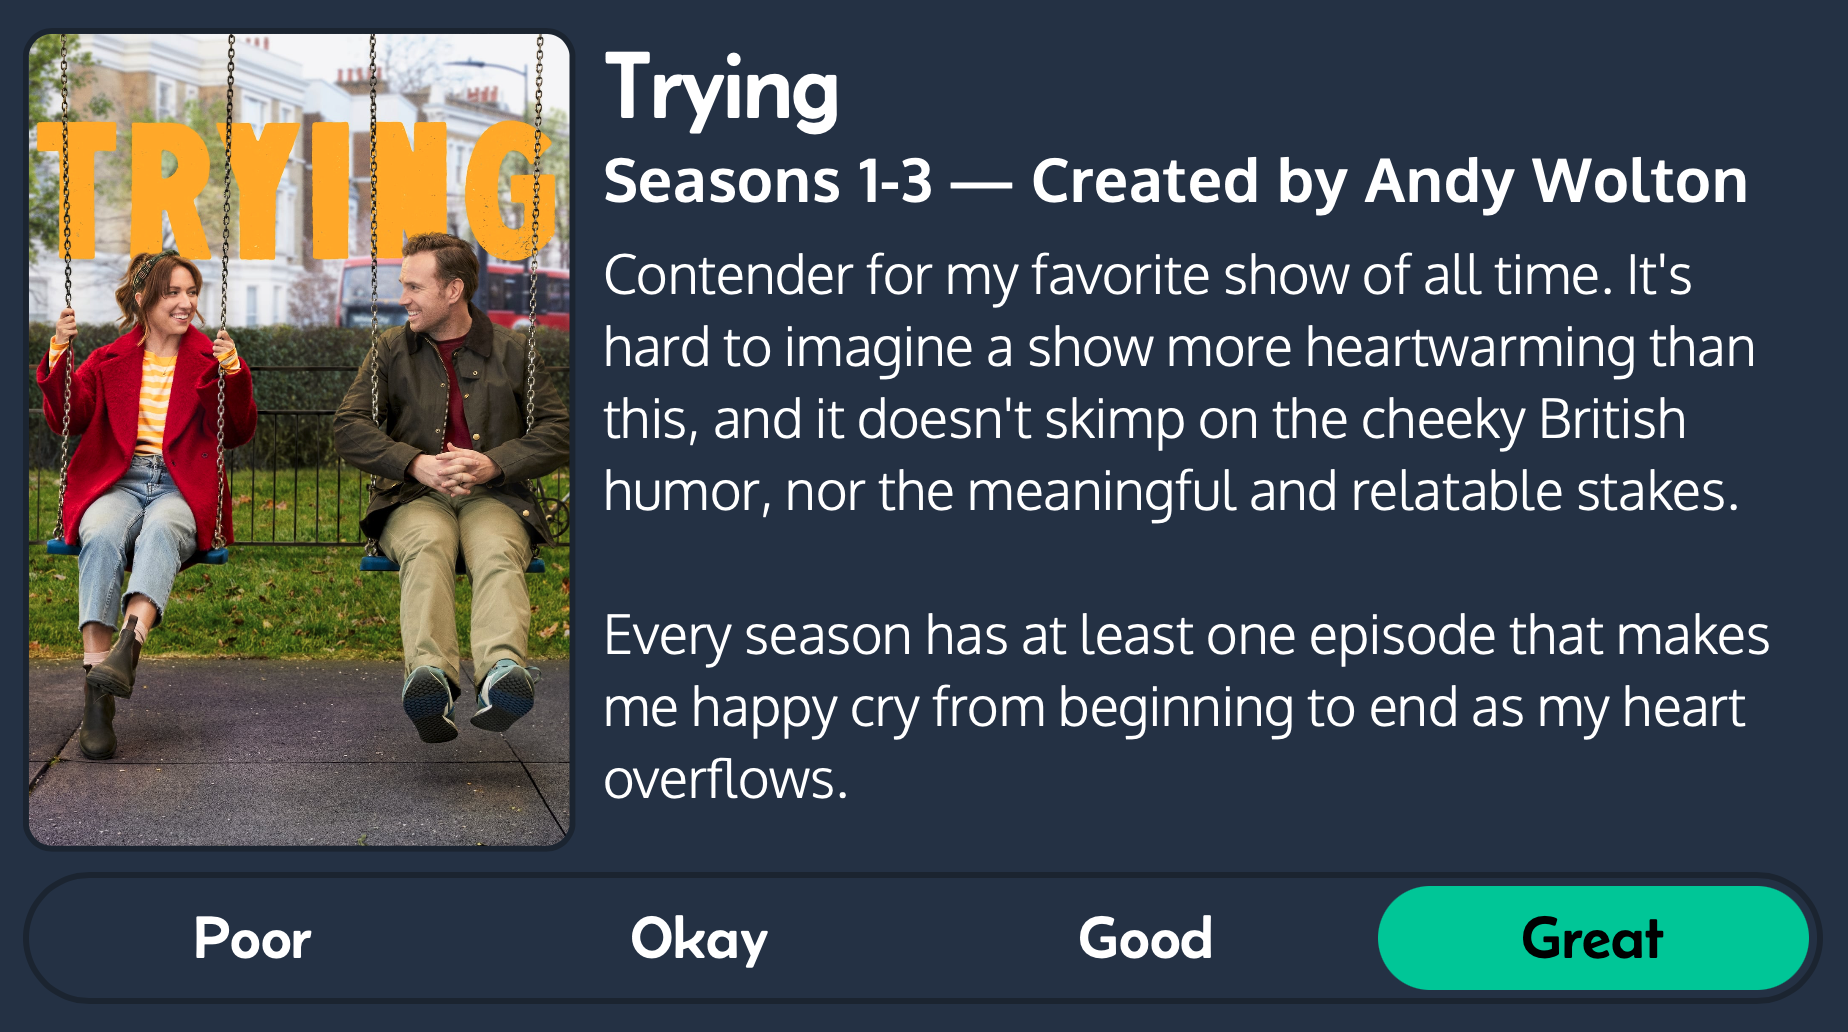 Two people sit on swings, smiling at each other, surrounded by greenery and houses. There&rsquo;s text reviewing the show &ldquo;Trying Seasons 1-3 — Created by Andy Walton”, rating it “Great” for humor and emotional impact.
Text: Contender for my favorite show of all time. It&rsquo;s hard to imagine a show more heartwarming than this, and it doesn&rsquo;t skimp on the cheeky British humor, nor the meaningful and relatable stakes.
Every season has at least one episode that makes me happy cry from beginning to end as my heart overflows.